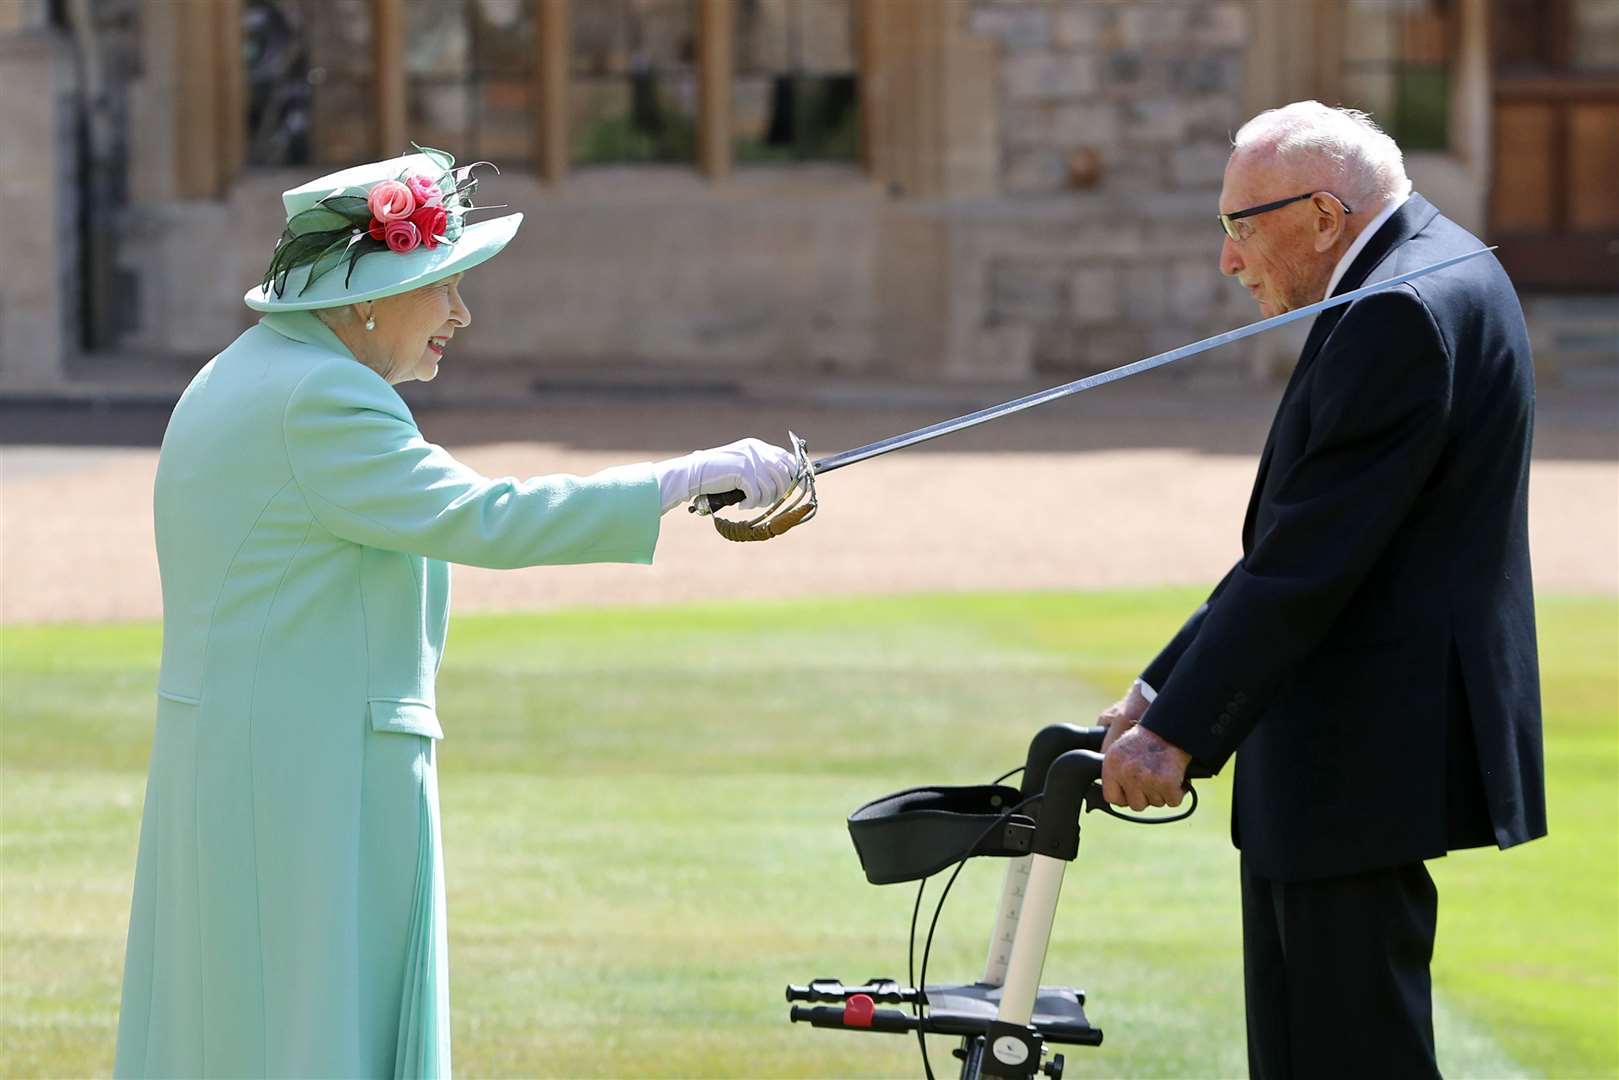 Captain Sir Thomas Moore receiving his knighthood from the Queen during a ceremony at Windsor Castle (Chris Jackson/PA)